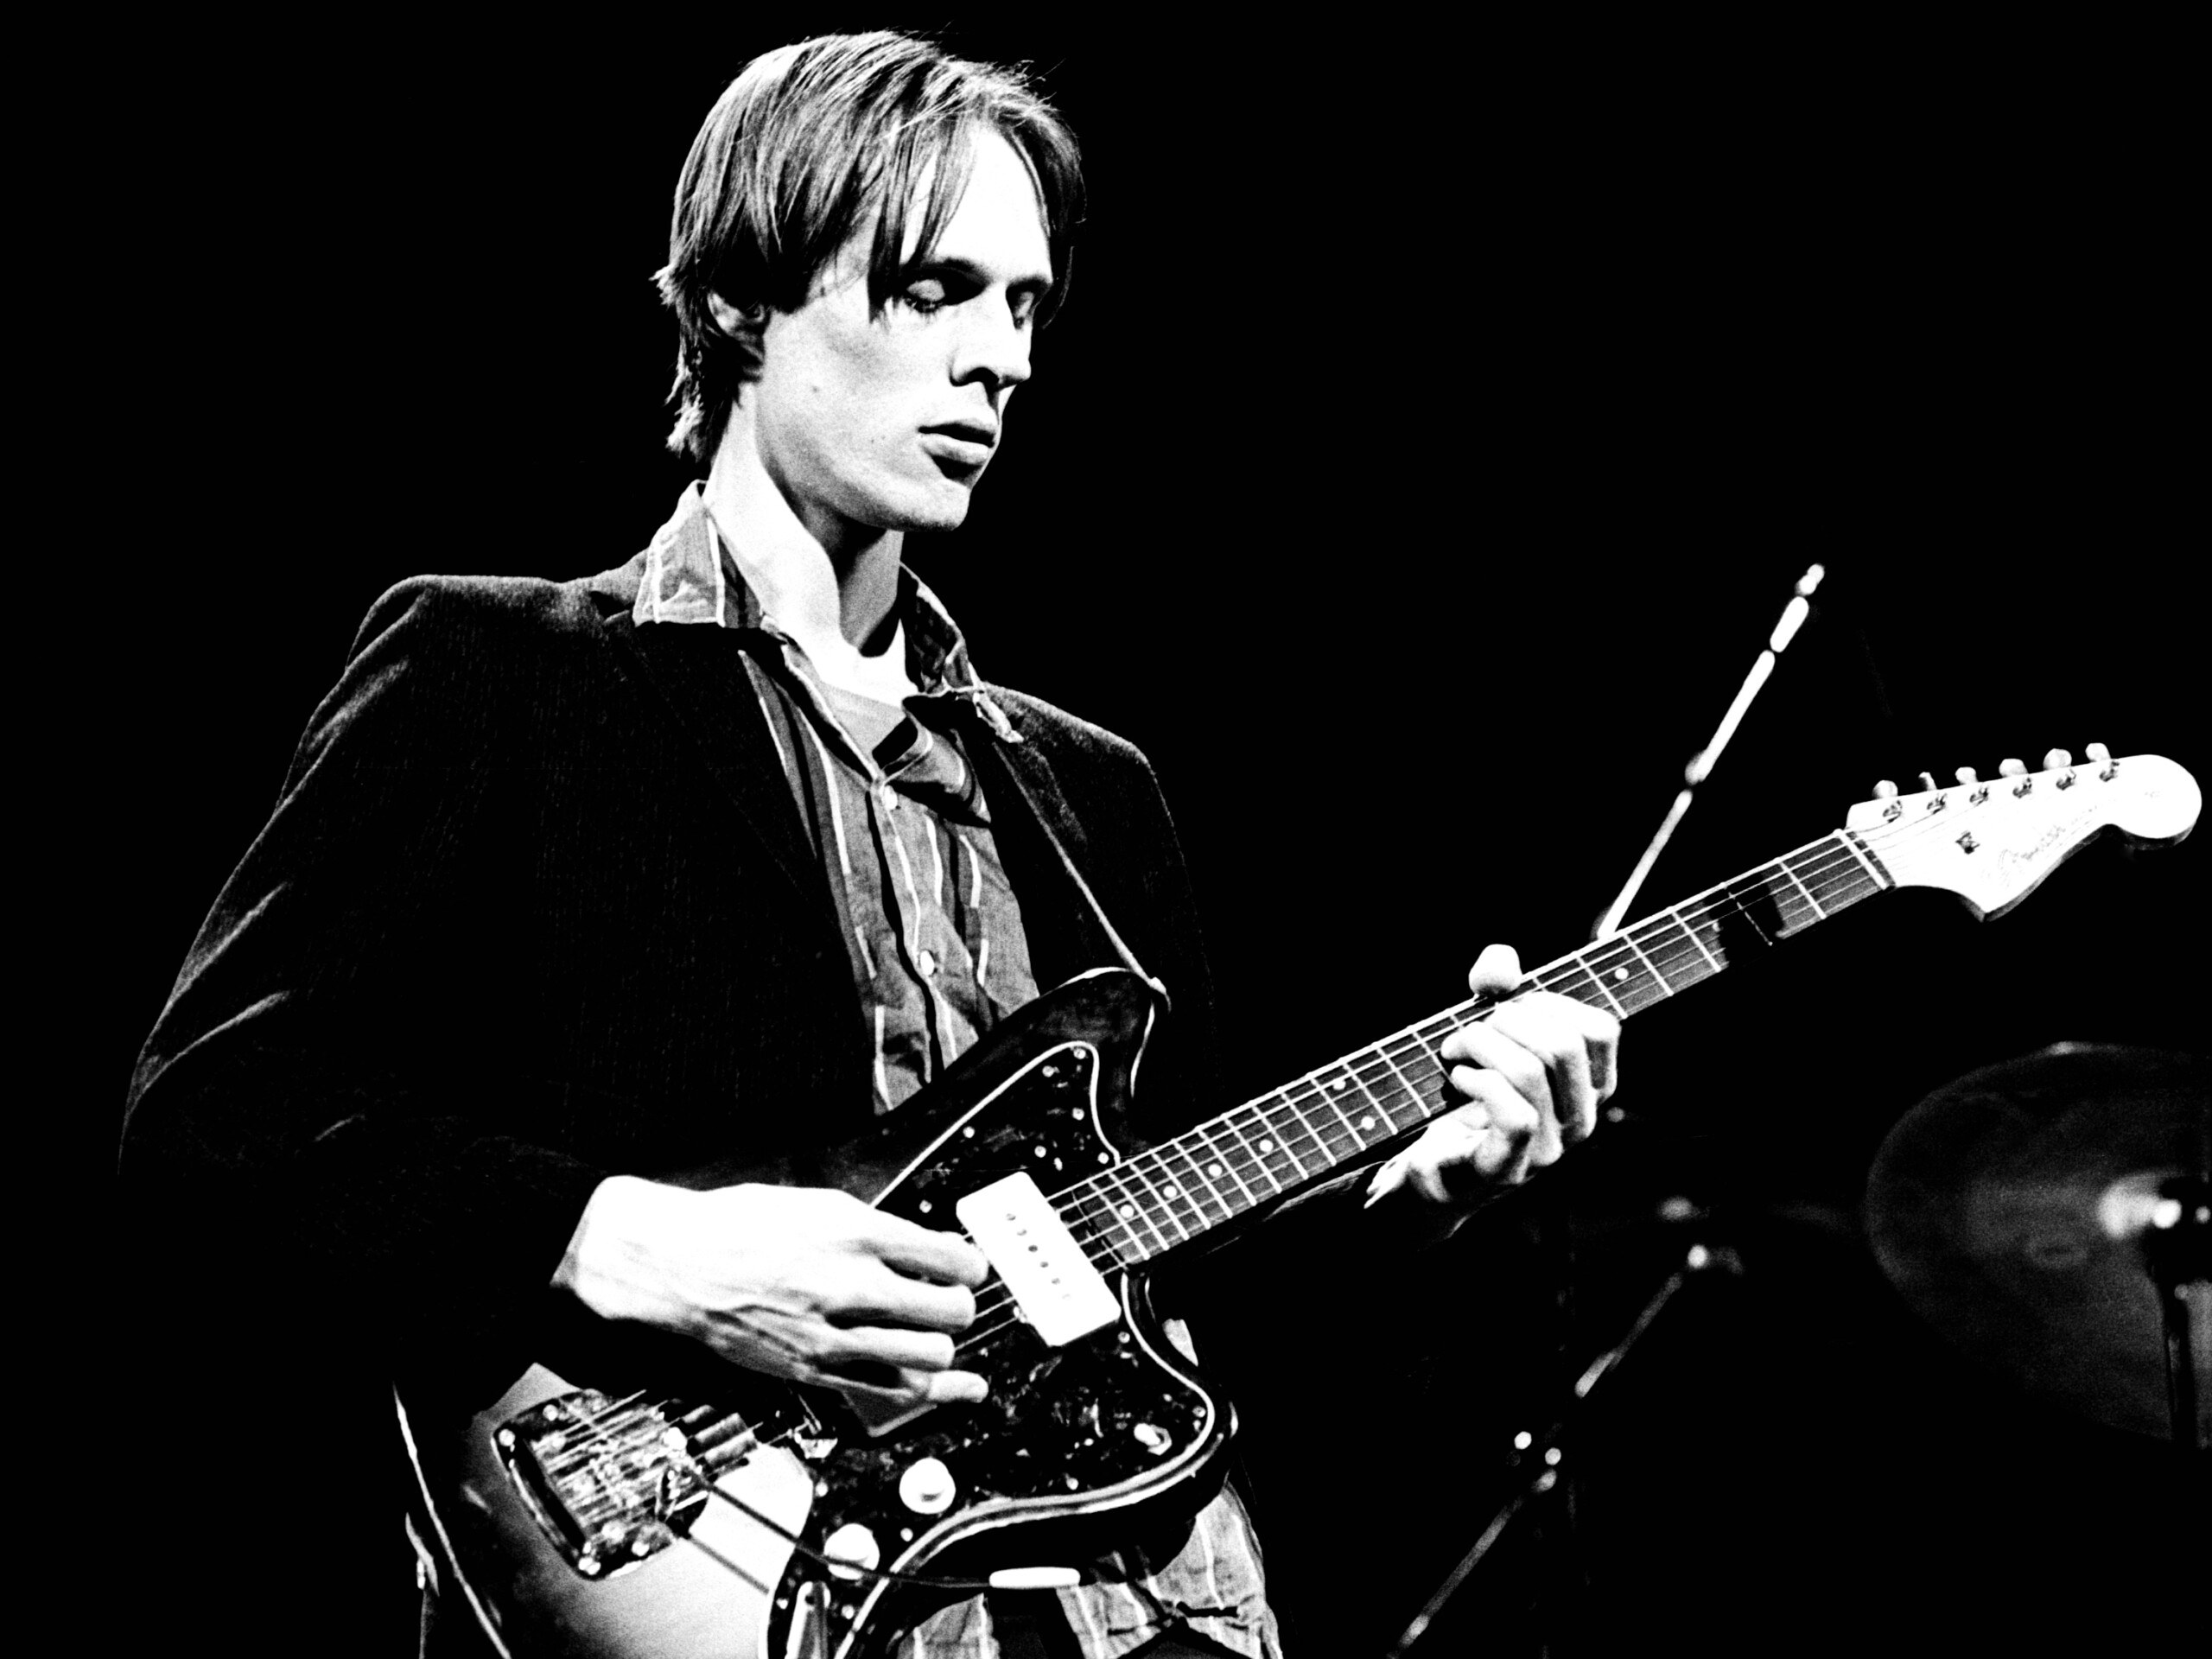 Featured image for “Tom Verlaine, guitarist and singer of influential rock band Television, dies at 73”